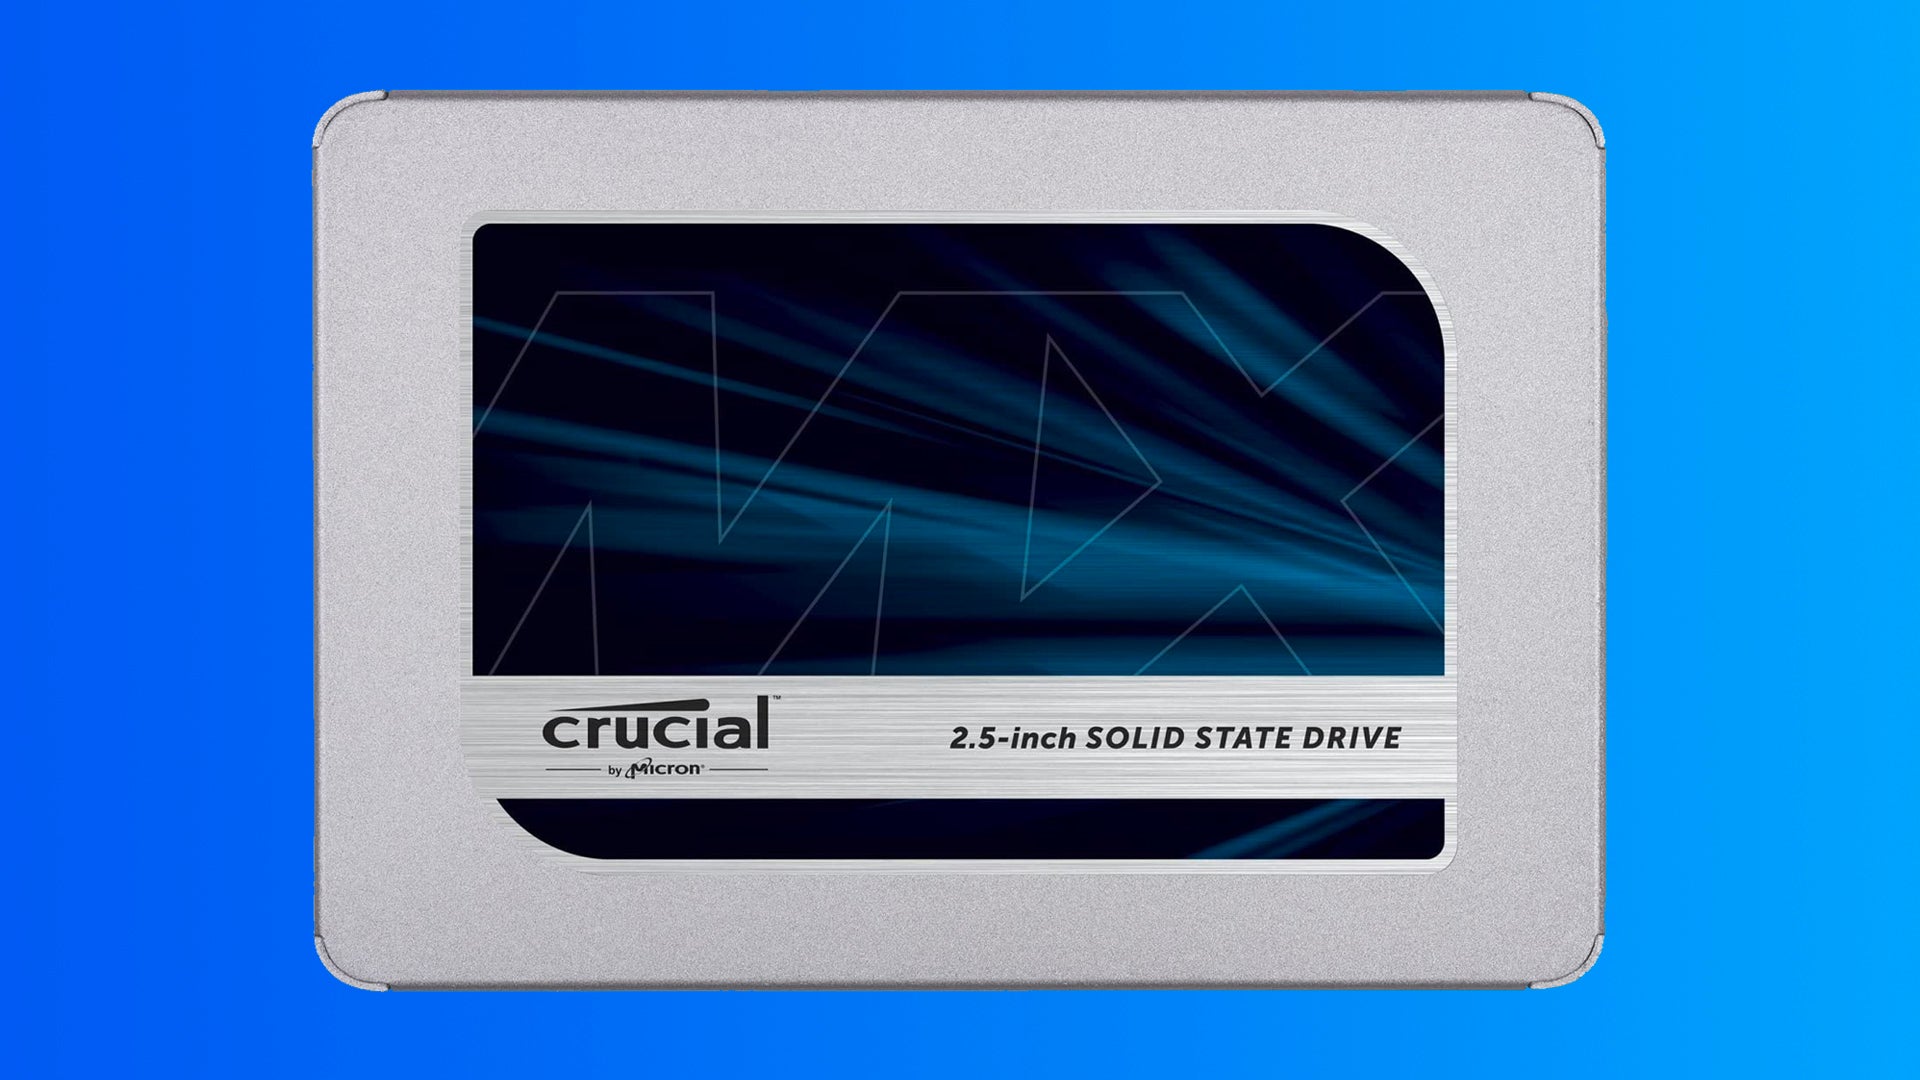 Grab the excellent Crucial MX500 2TB SATA SSD for just £106 from